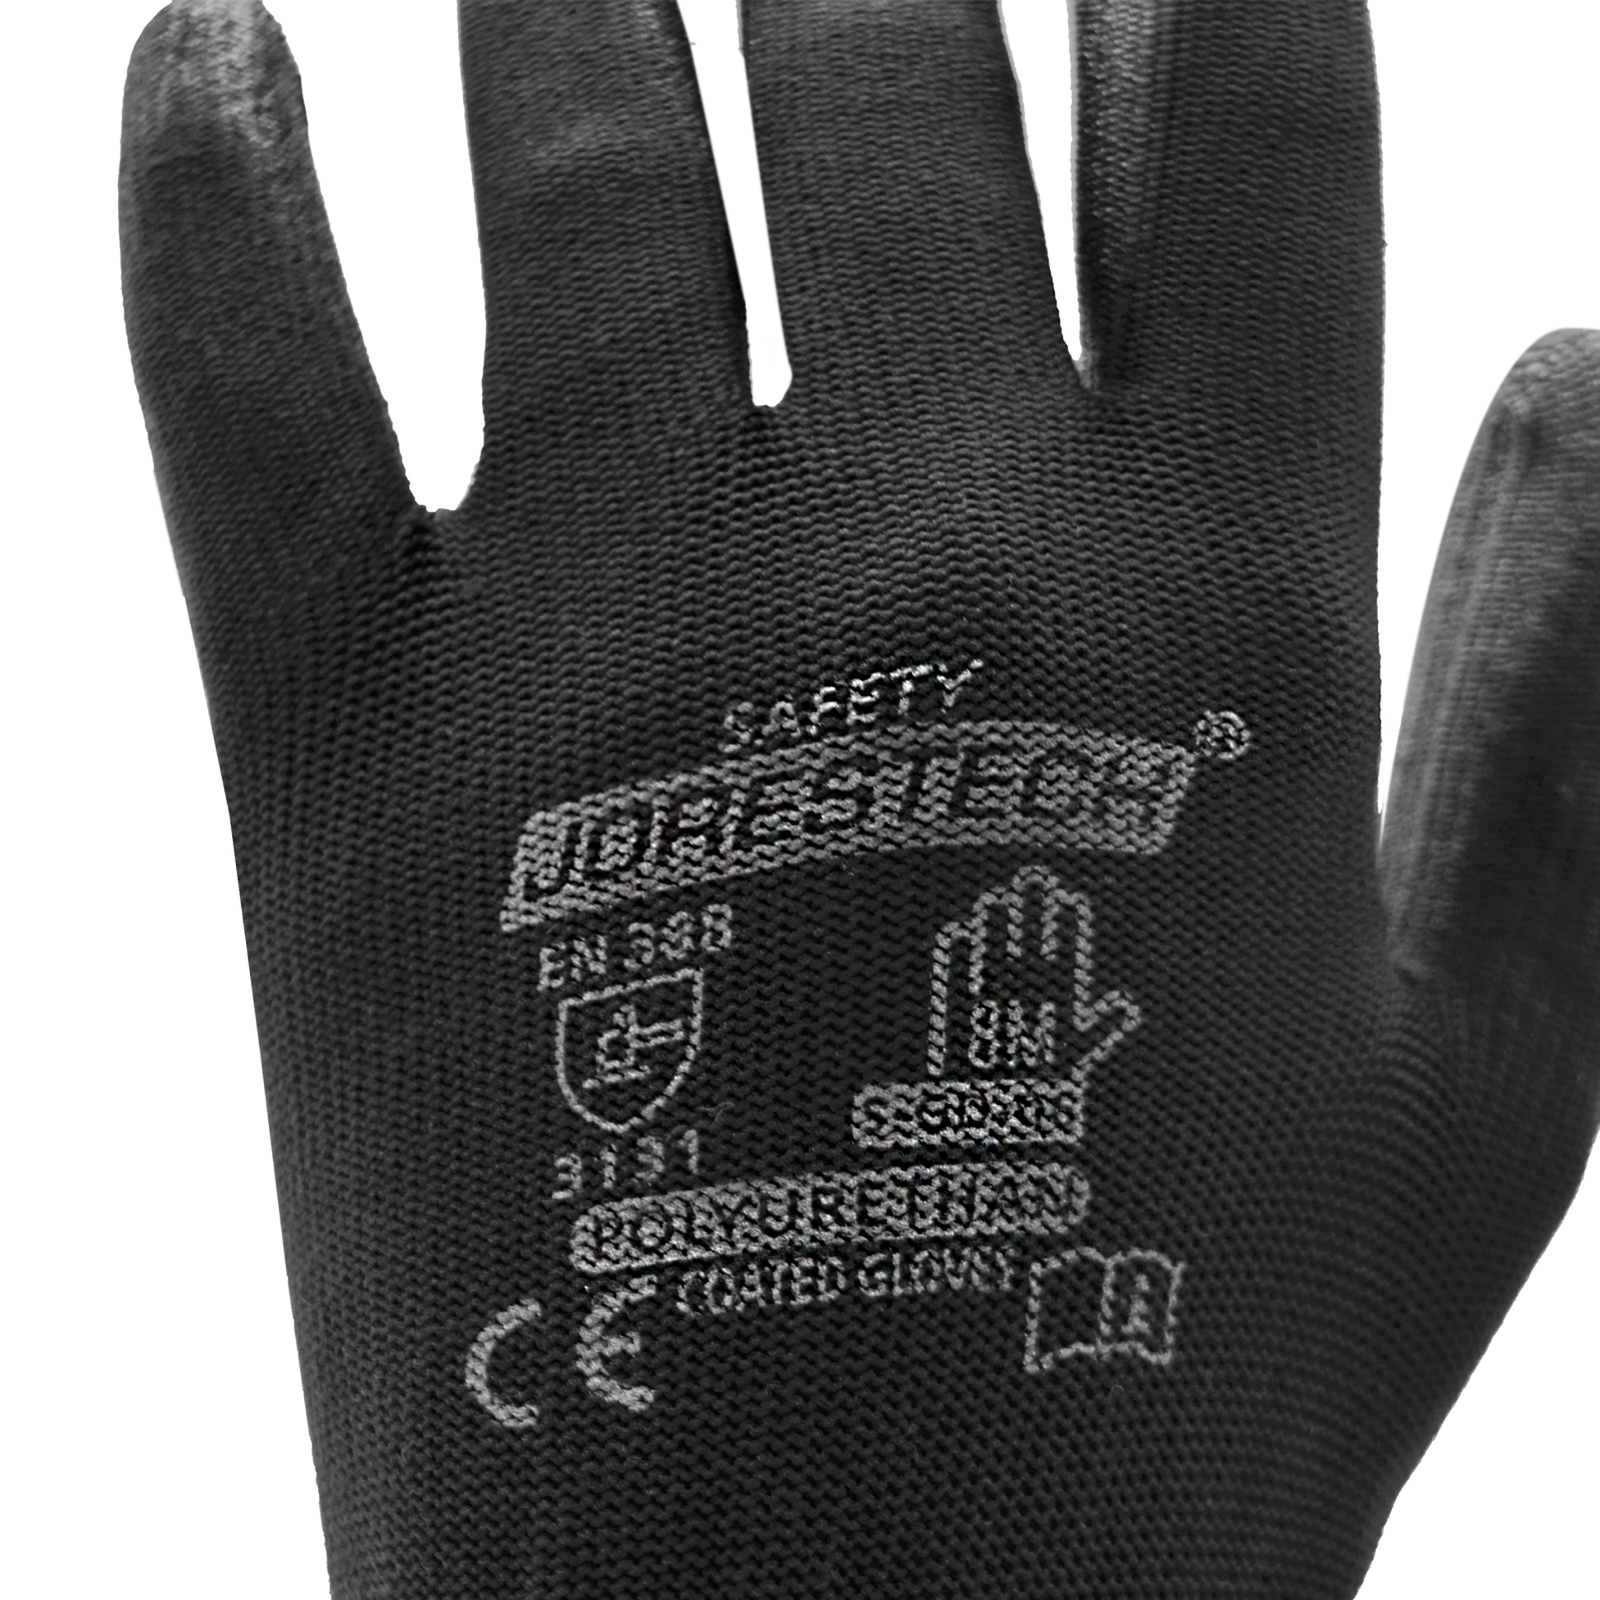 Cut-Resistant Multipurpose Work Gloves – Pack of 12 | Technopack Safety & PPE M by JORESTECH